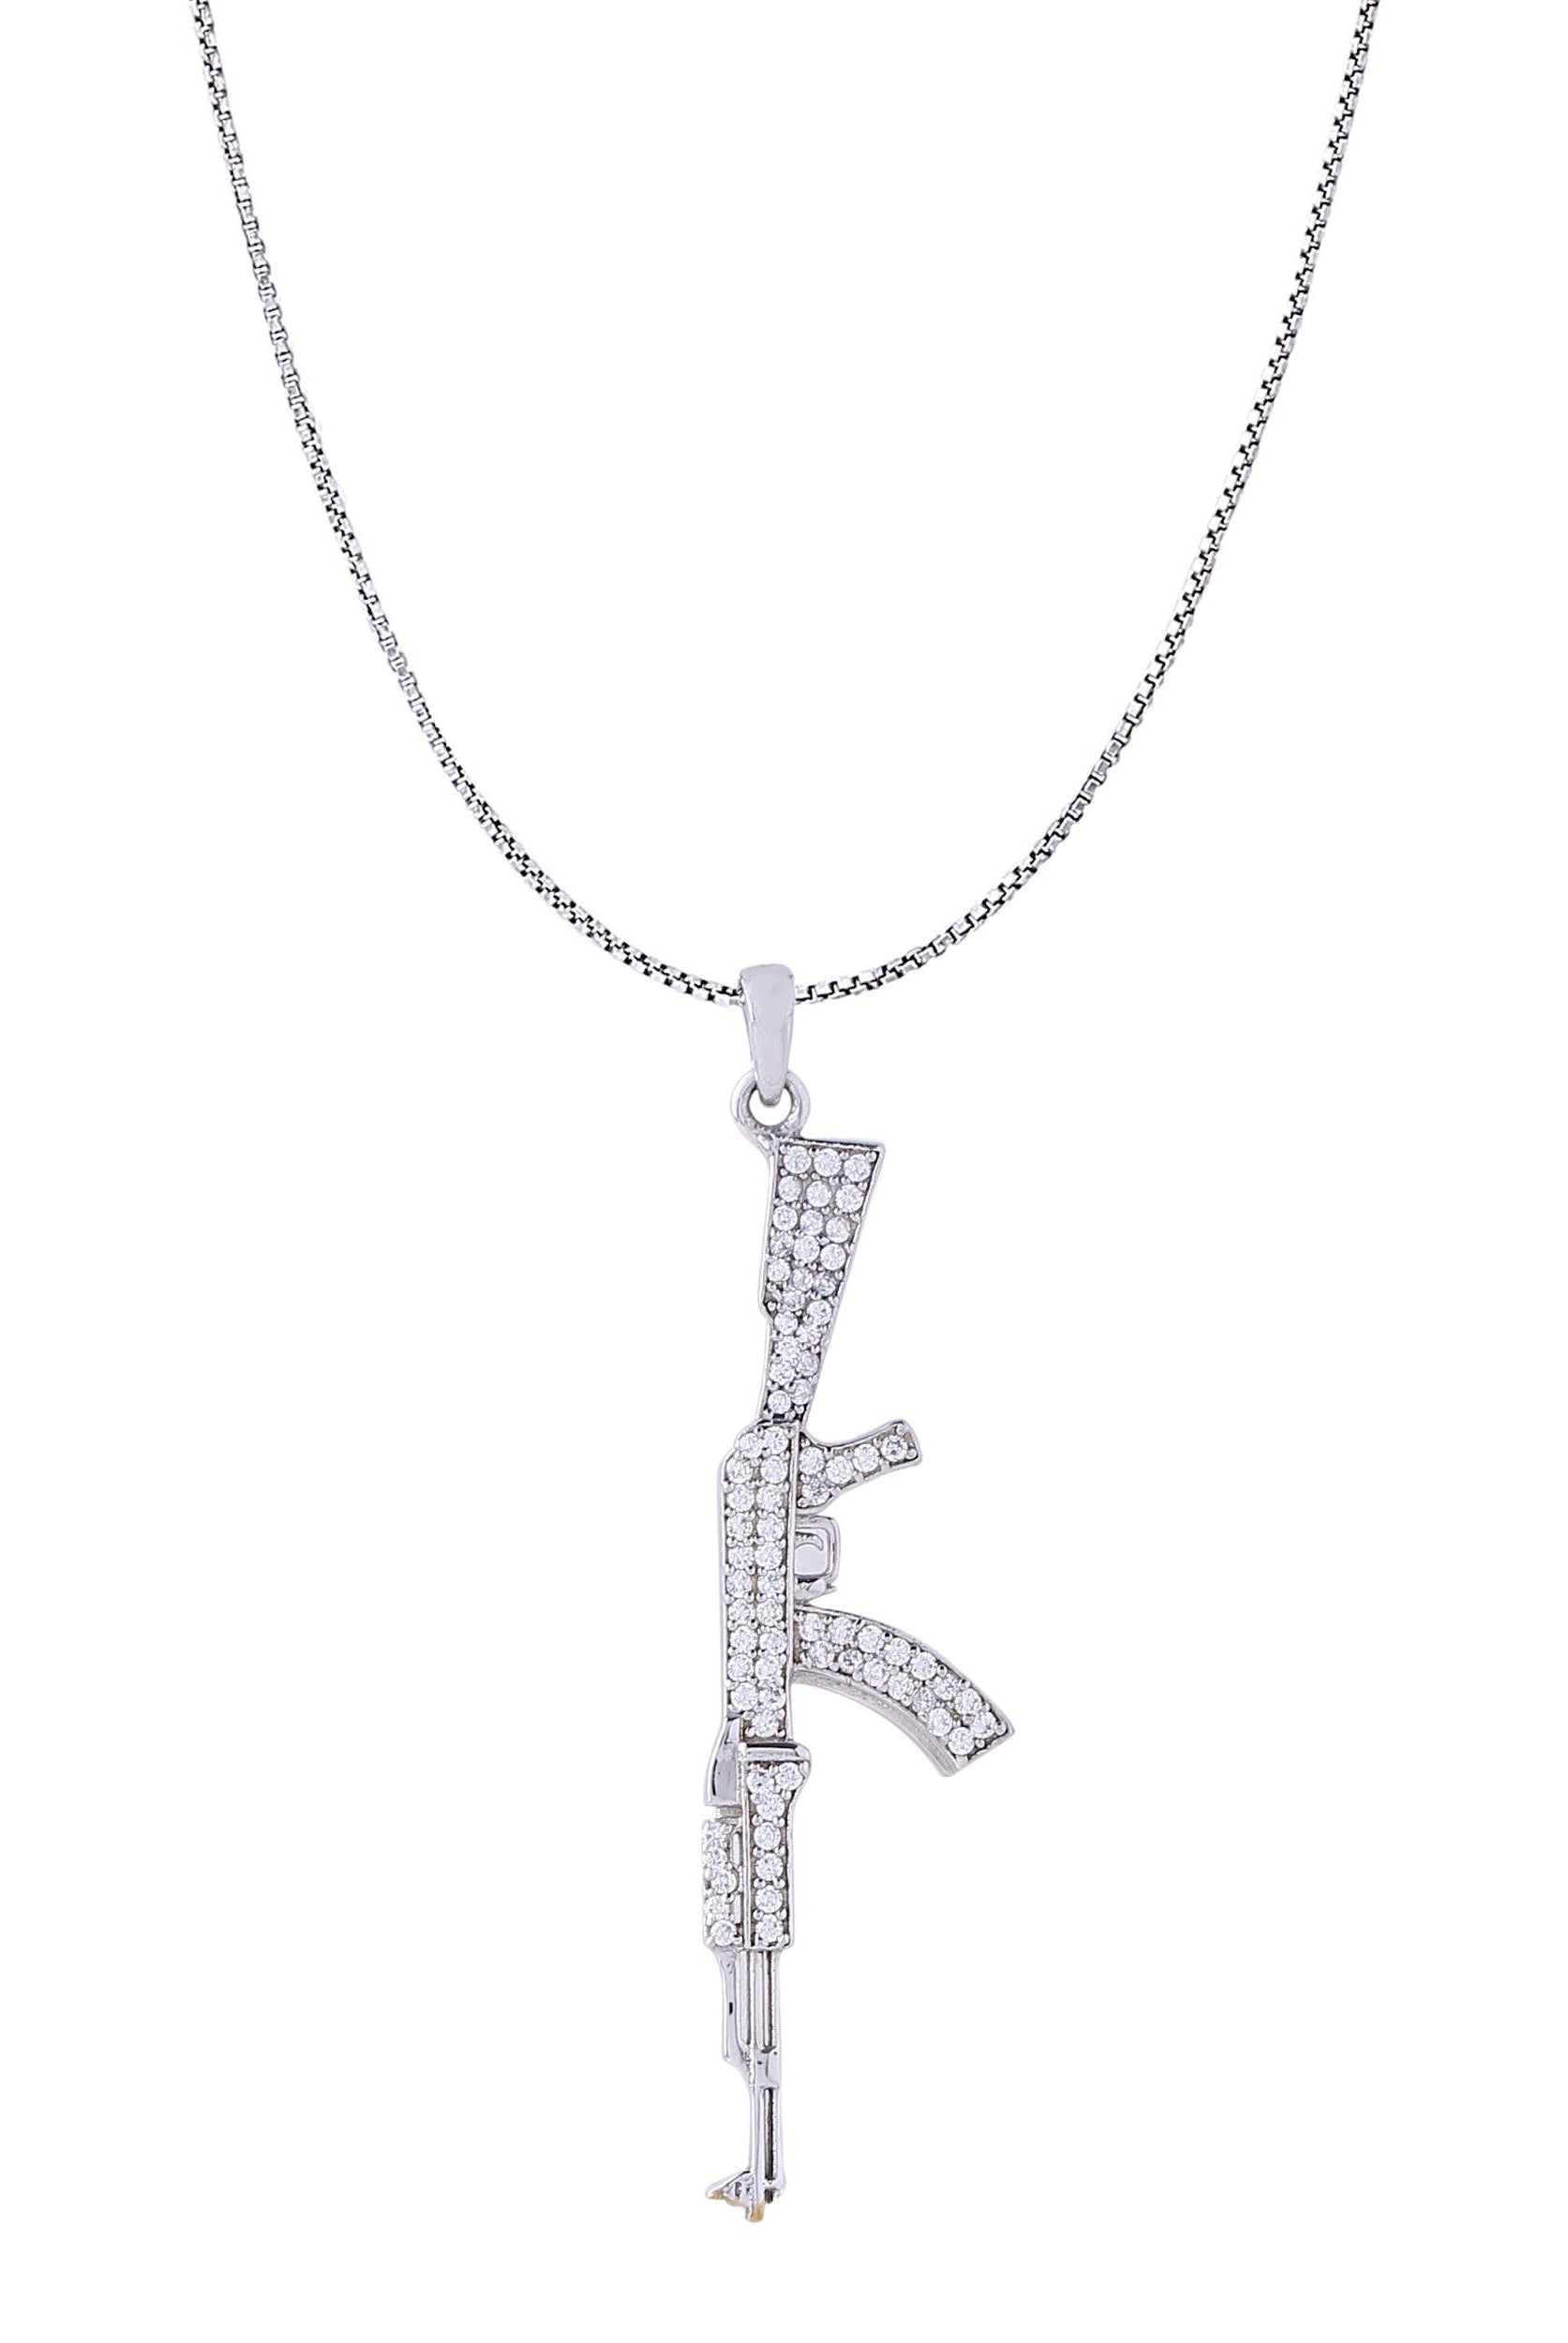 Ak47 Pendant is a White Gold Color Pendant Made of 925 Sterling Silver Material with 20 Inch Long Silver Chain